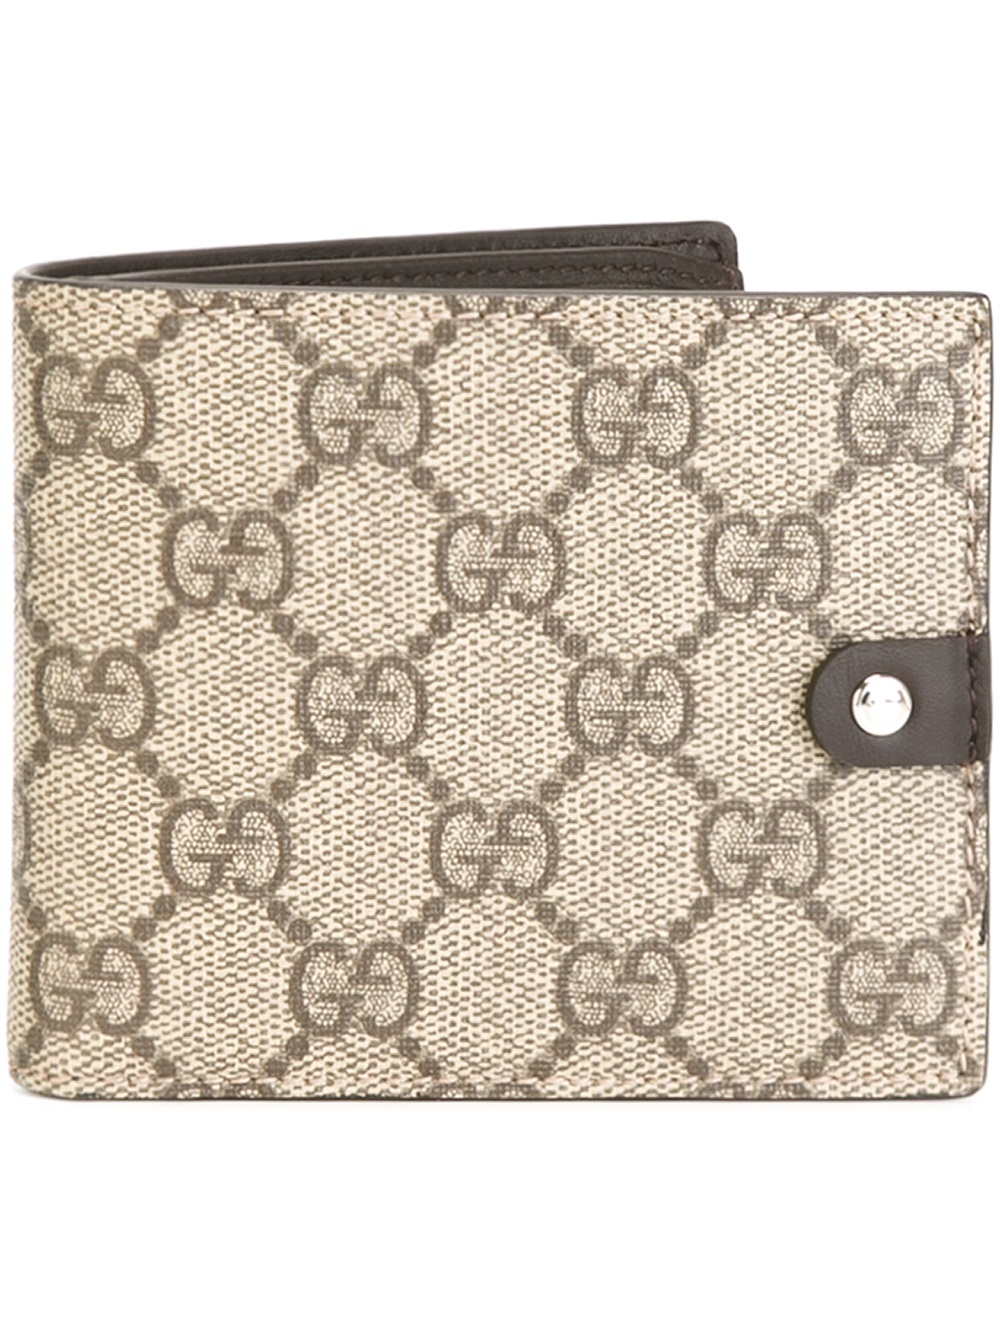 Lyst - Gucci Gg Supreme Wallet in Natural for Men